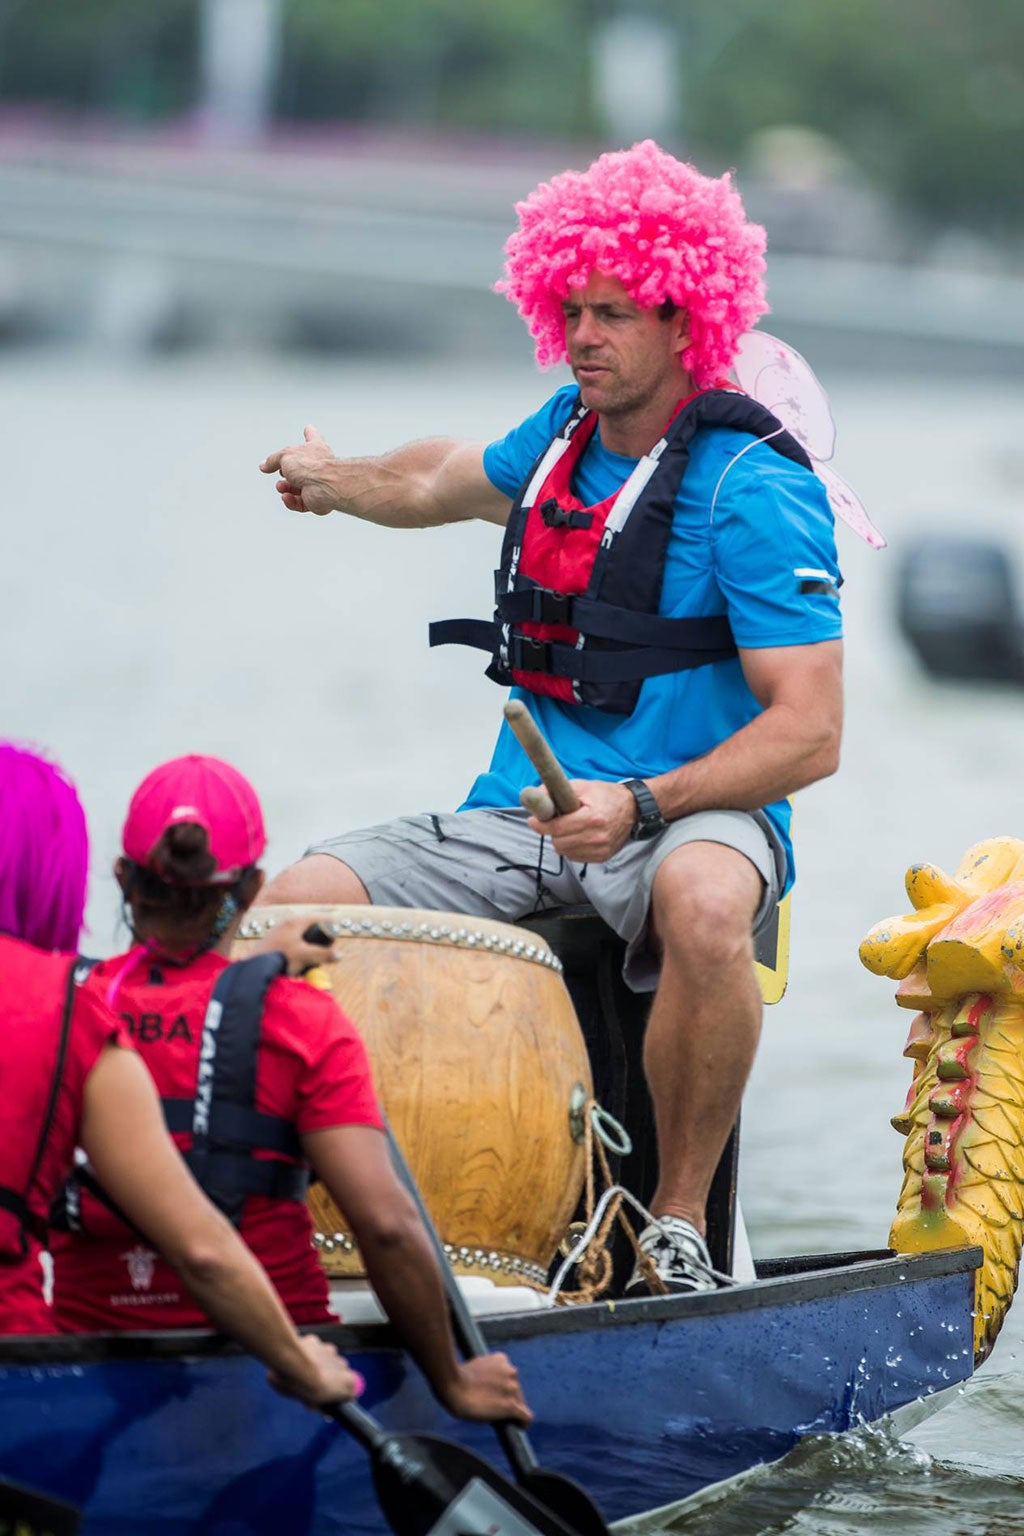 A bit of fun prior to the third day of the Extreme Sailing Series in Singapore saw some of the crews banging the drum for the dragon boat racers, including Pete Greenhalgh, long-standing right hand man to Leigh McMillan on The Wave, Muscat